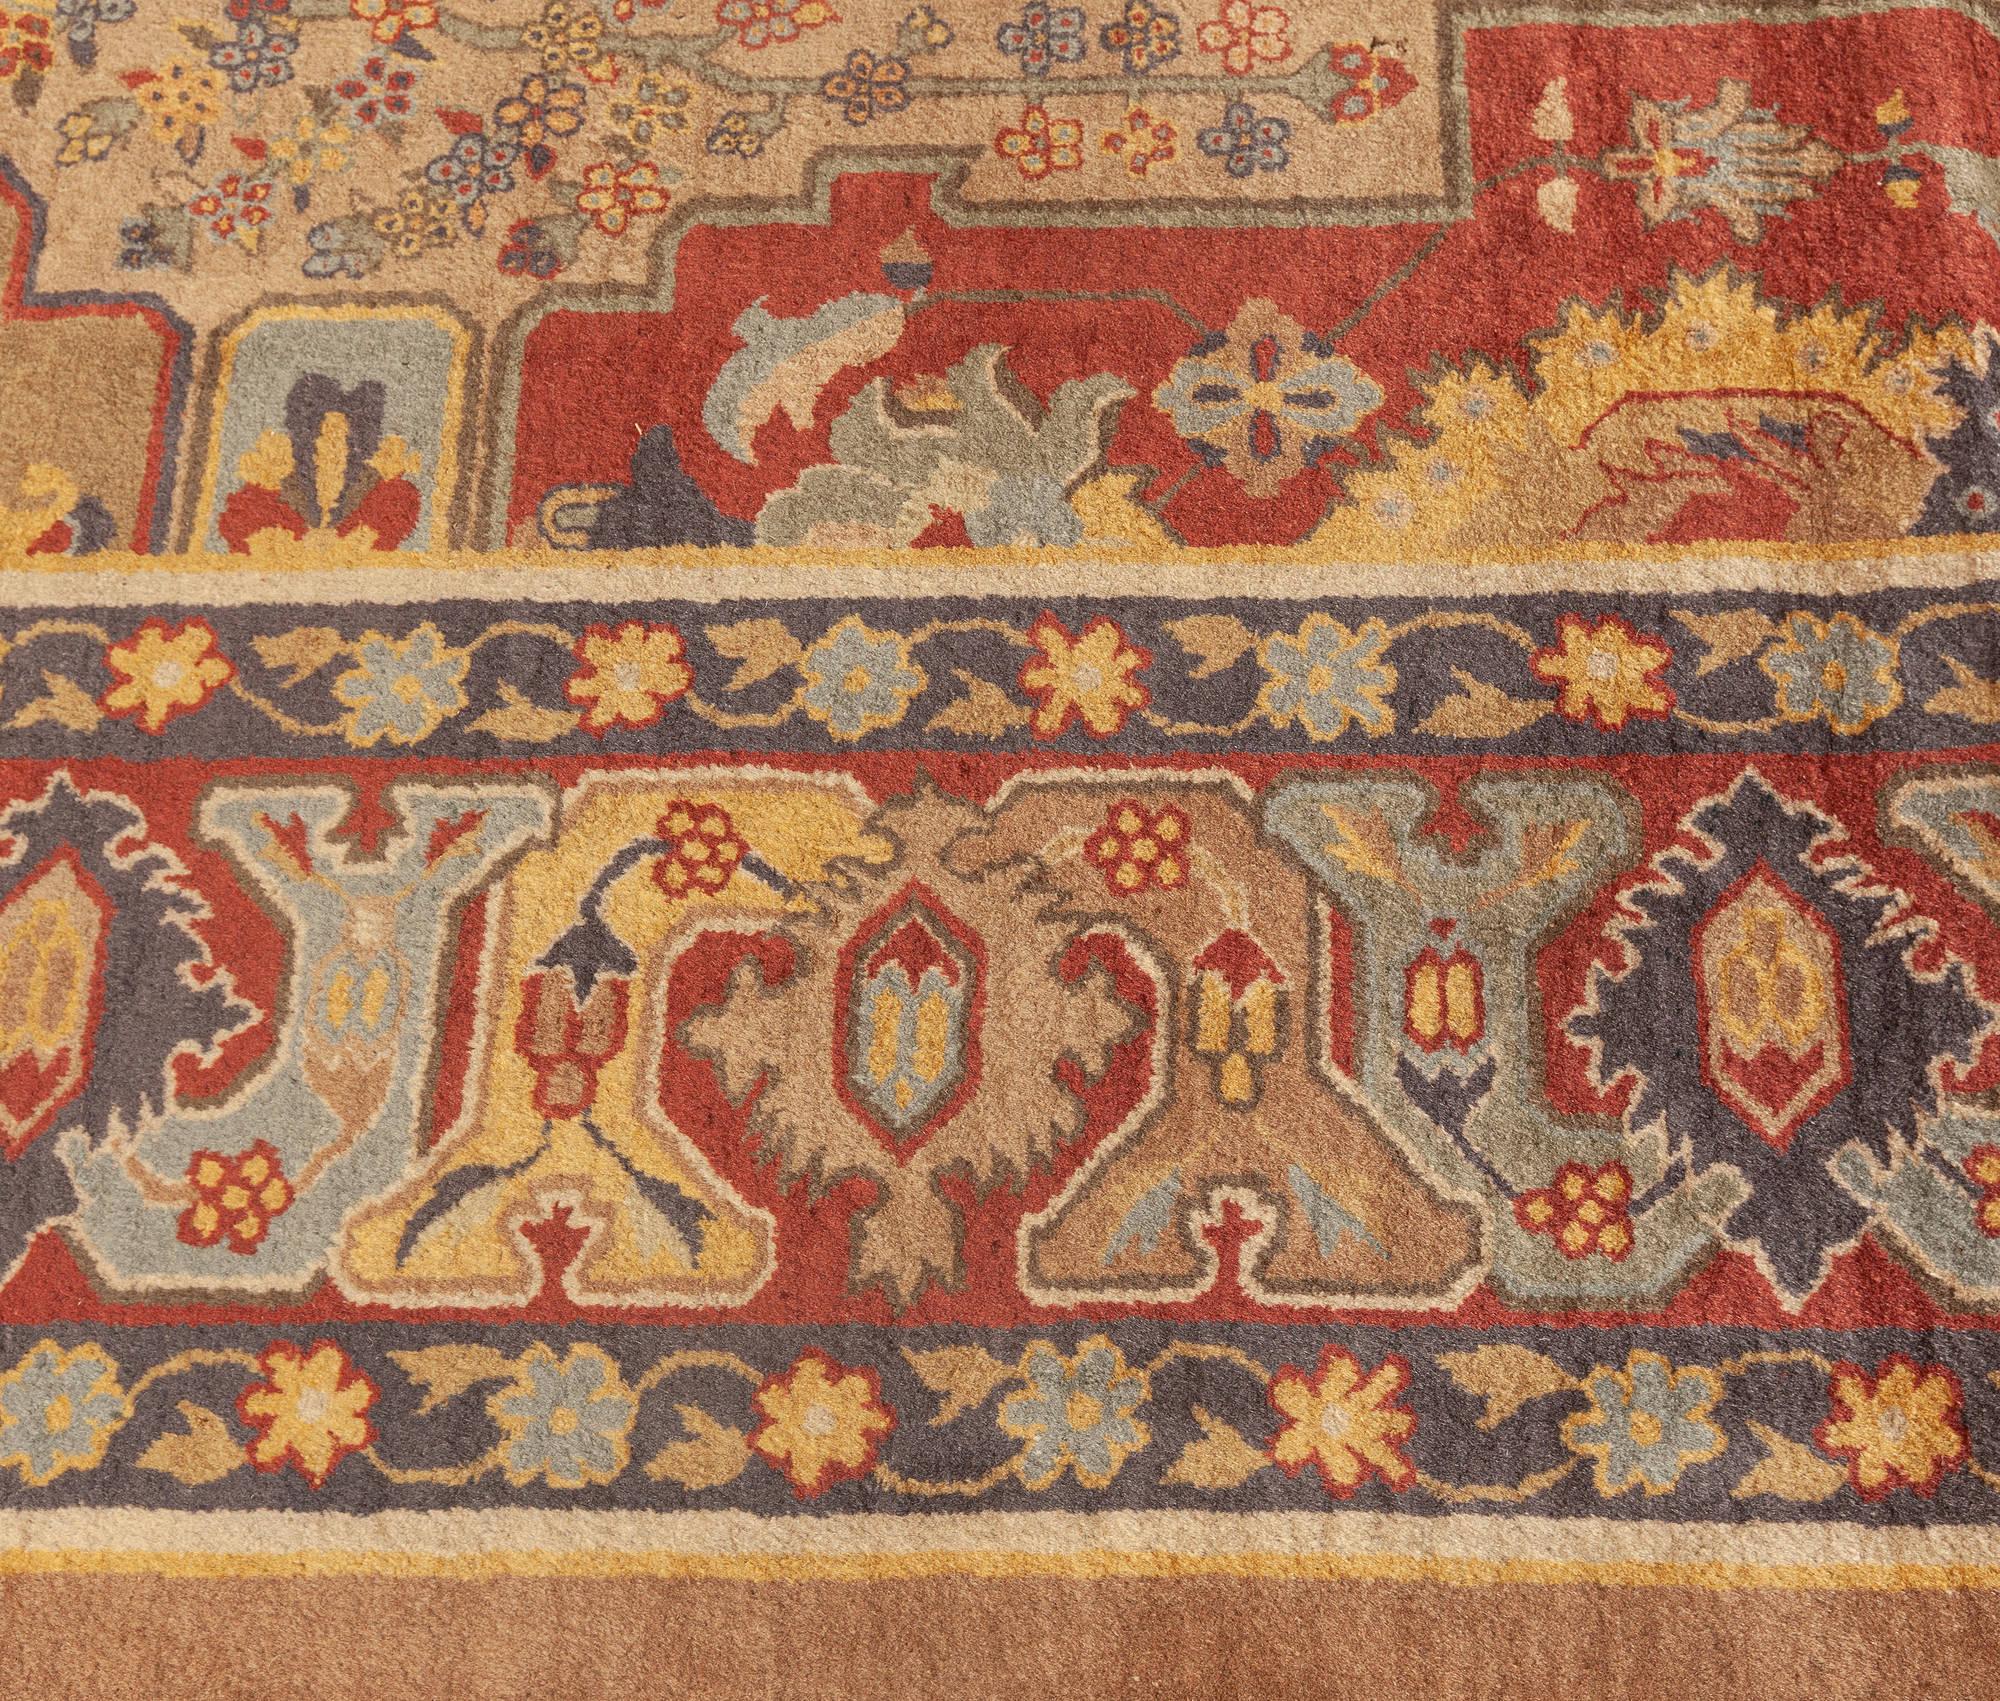 Early 20th Century Indian Handmade Wool Carpet In Good Condition For Sale In New York, NY